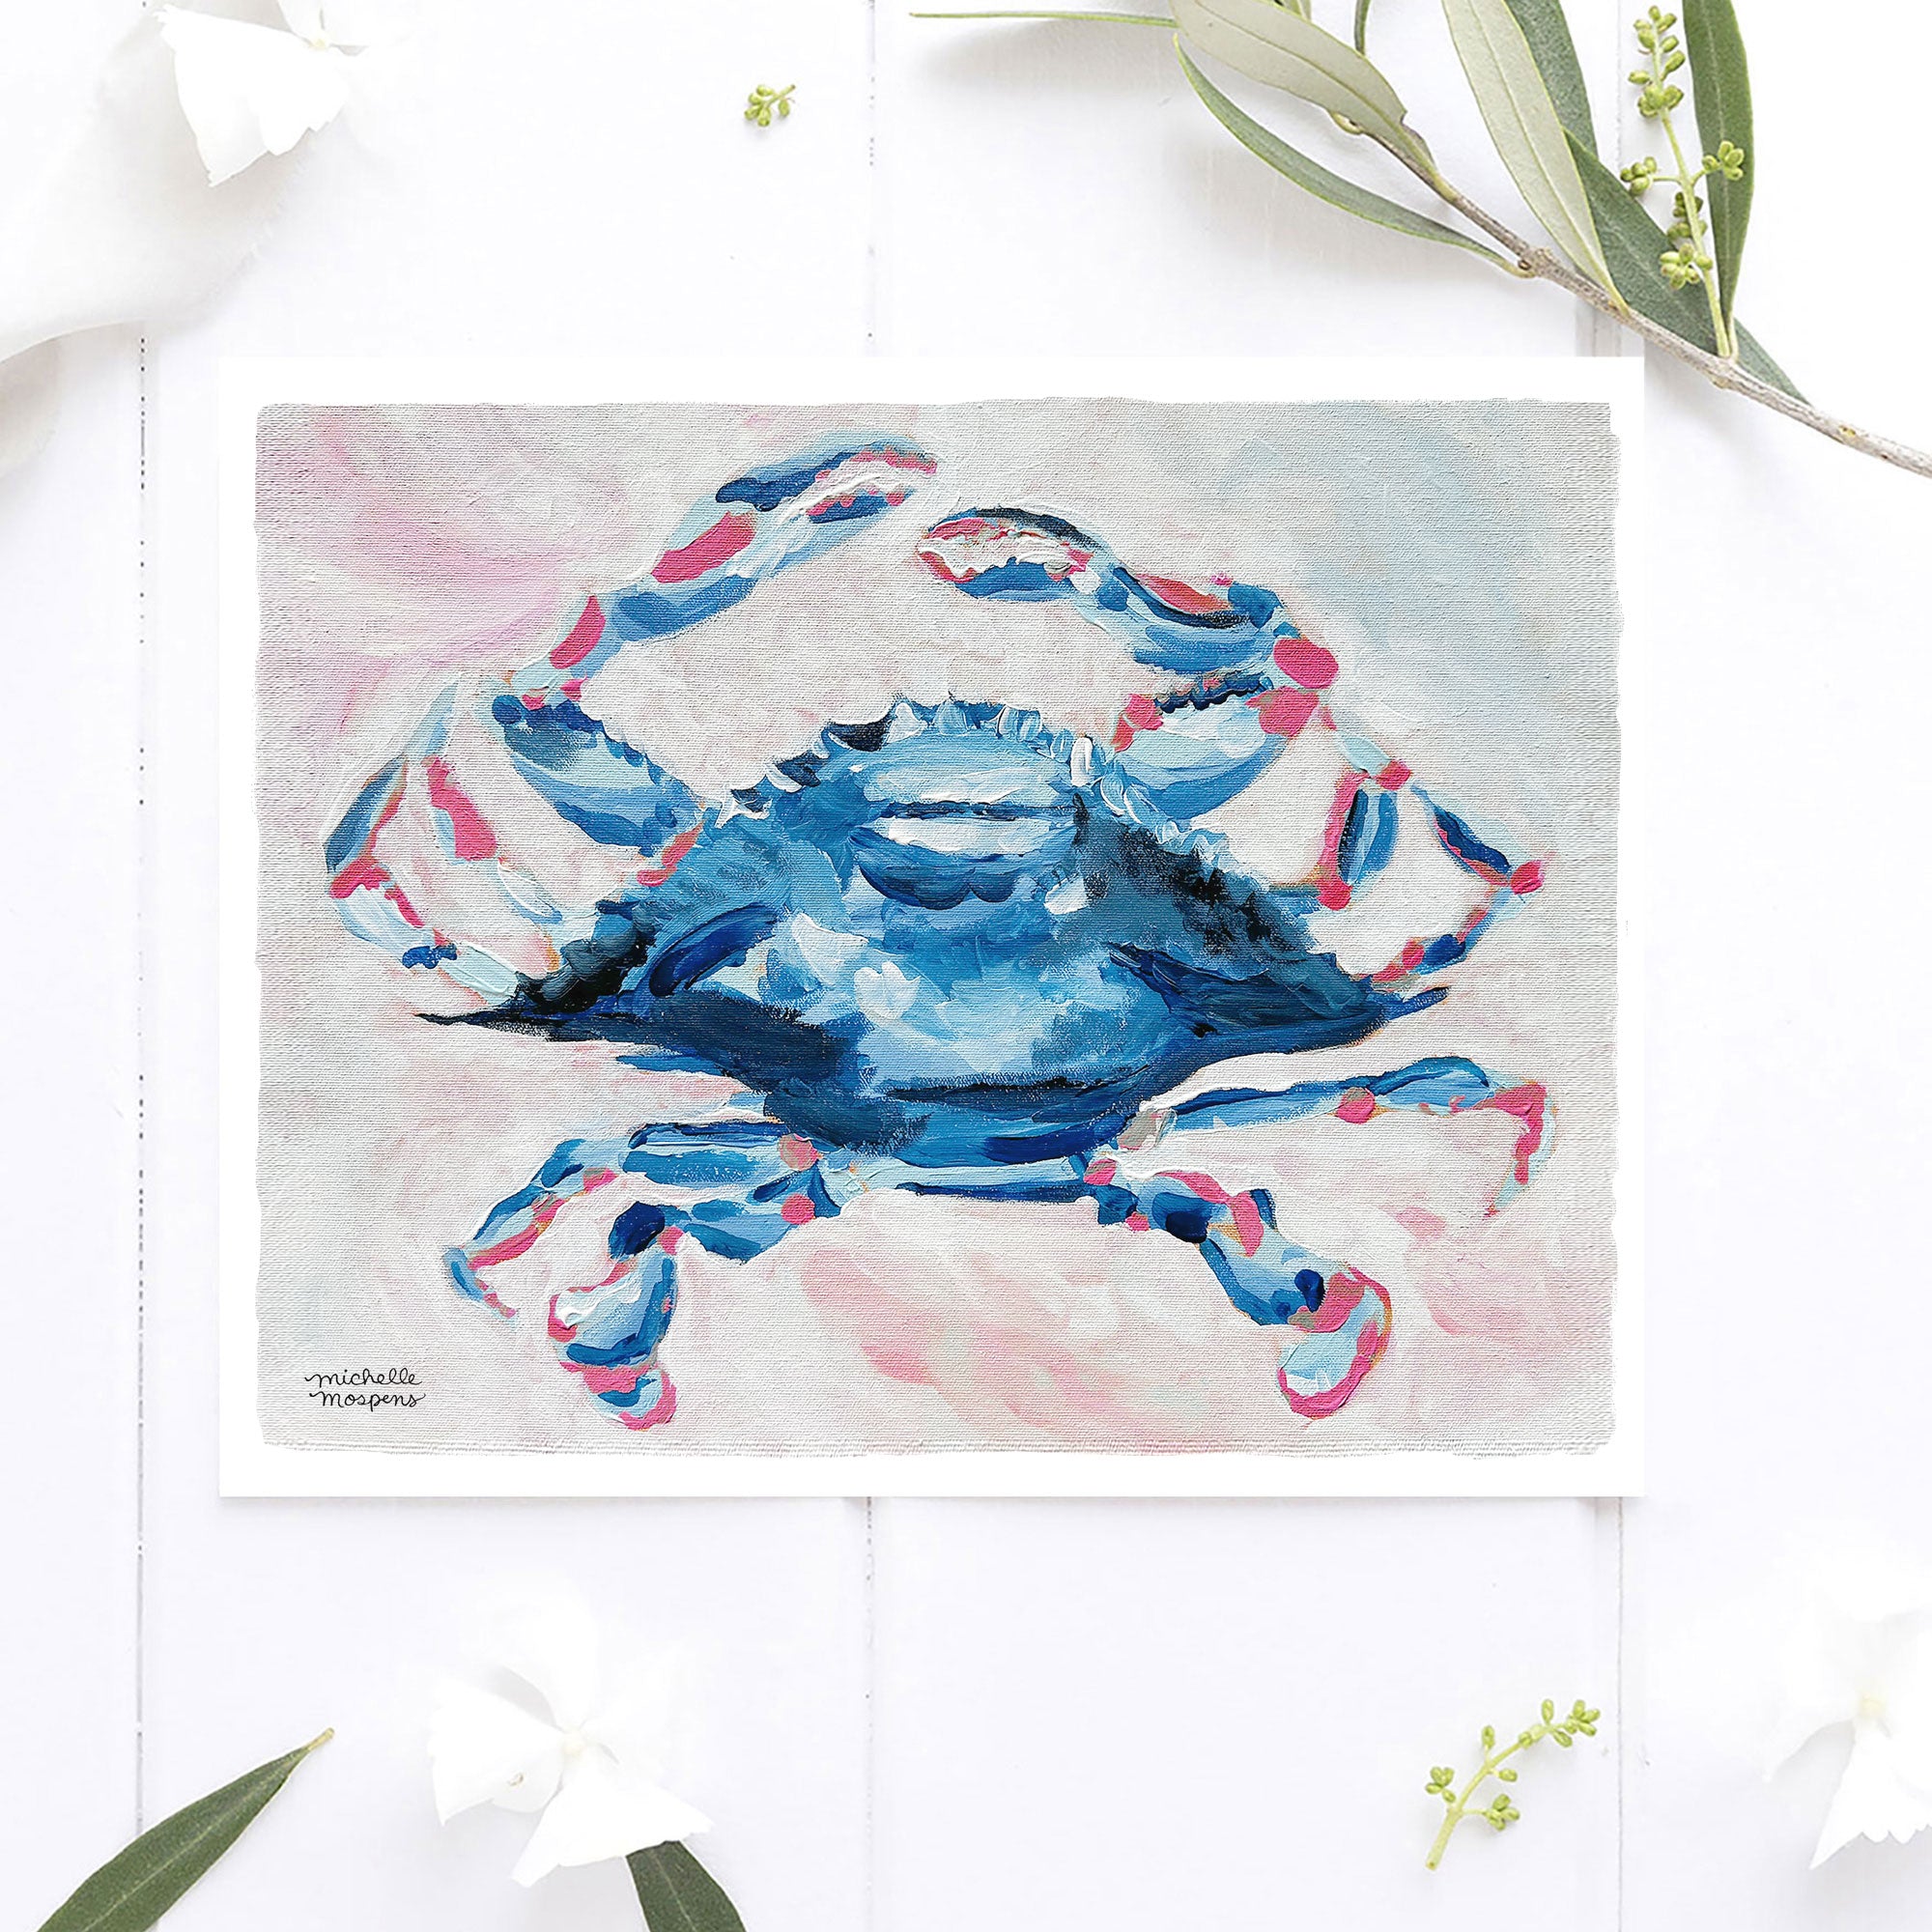 Pinch Me Blue Crab Painting Wall Art Print by Michelle Mospens